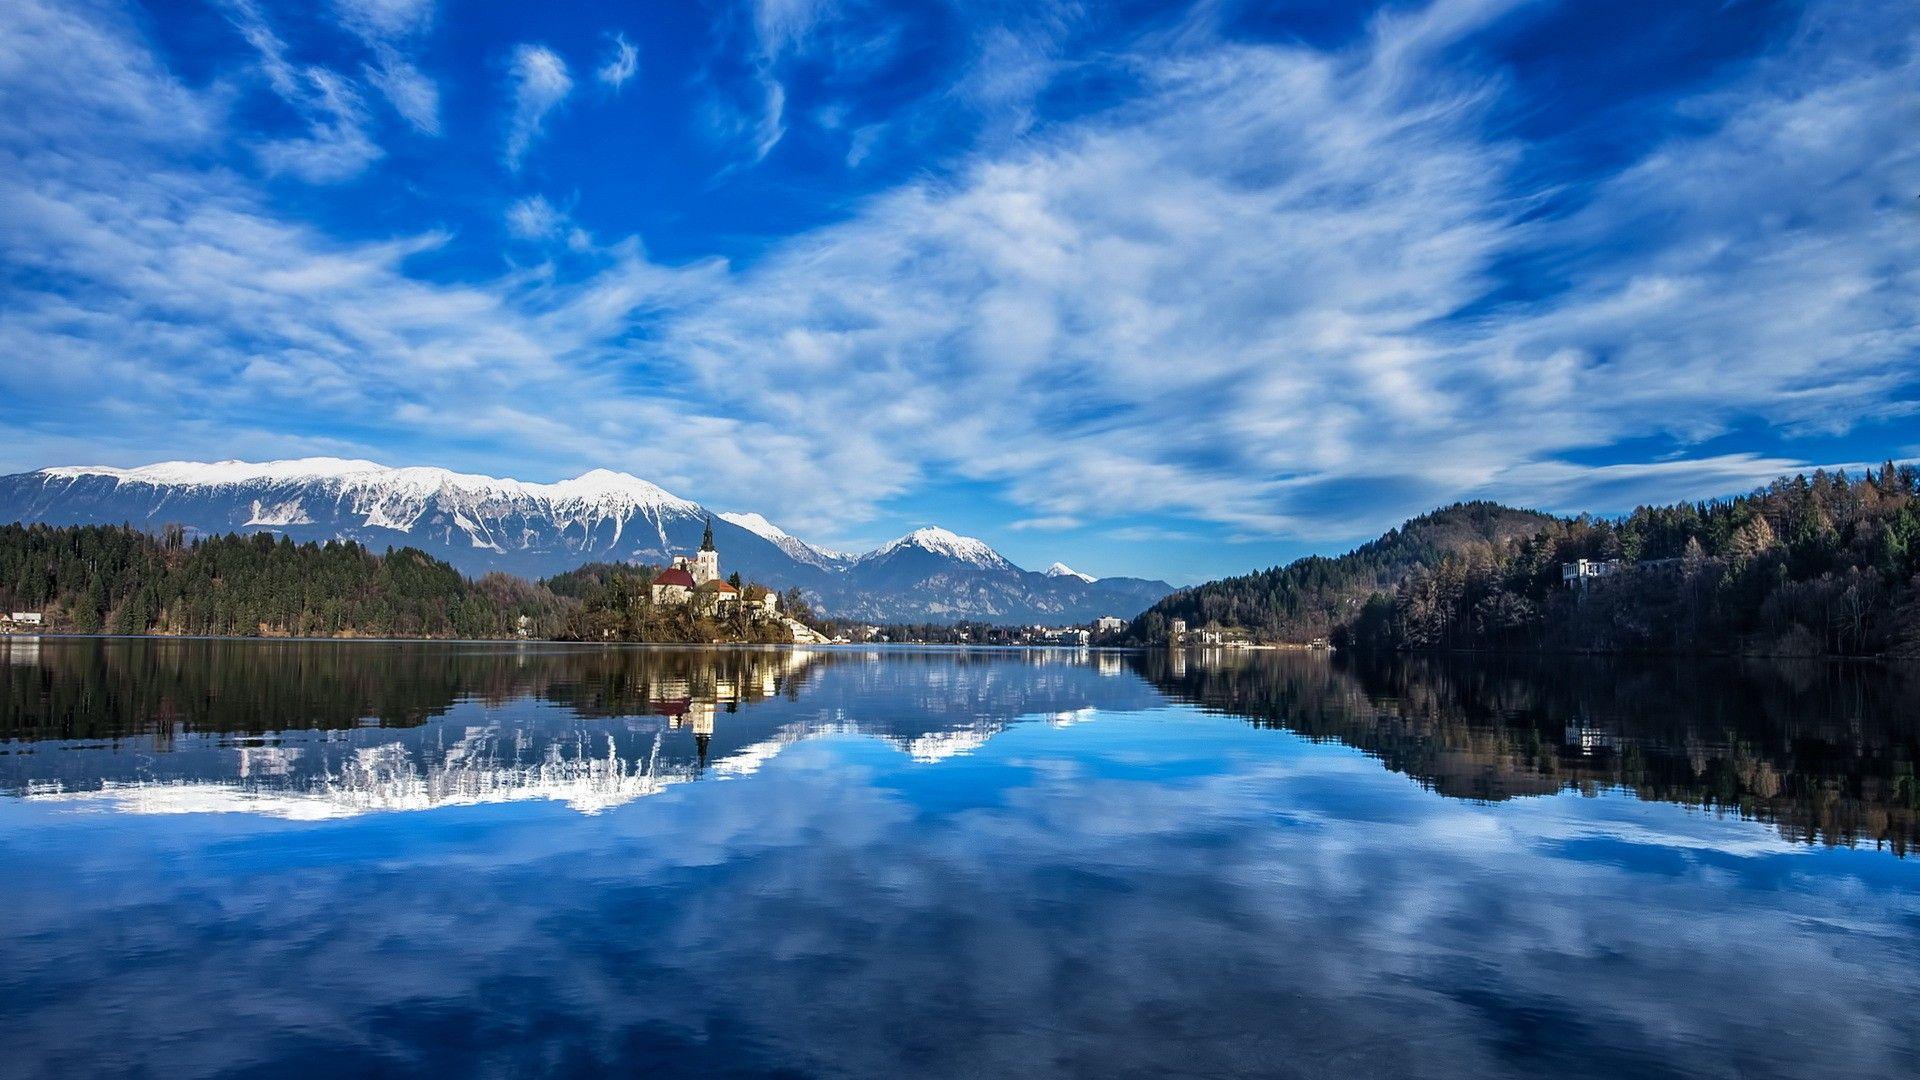 Bled Tag wallpaper: Slovenia Nature Sea Church Bled HD Picture